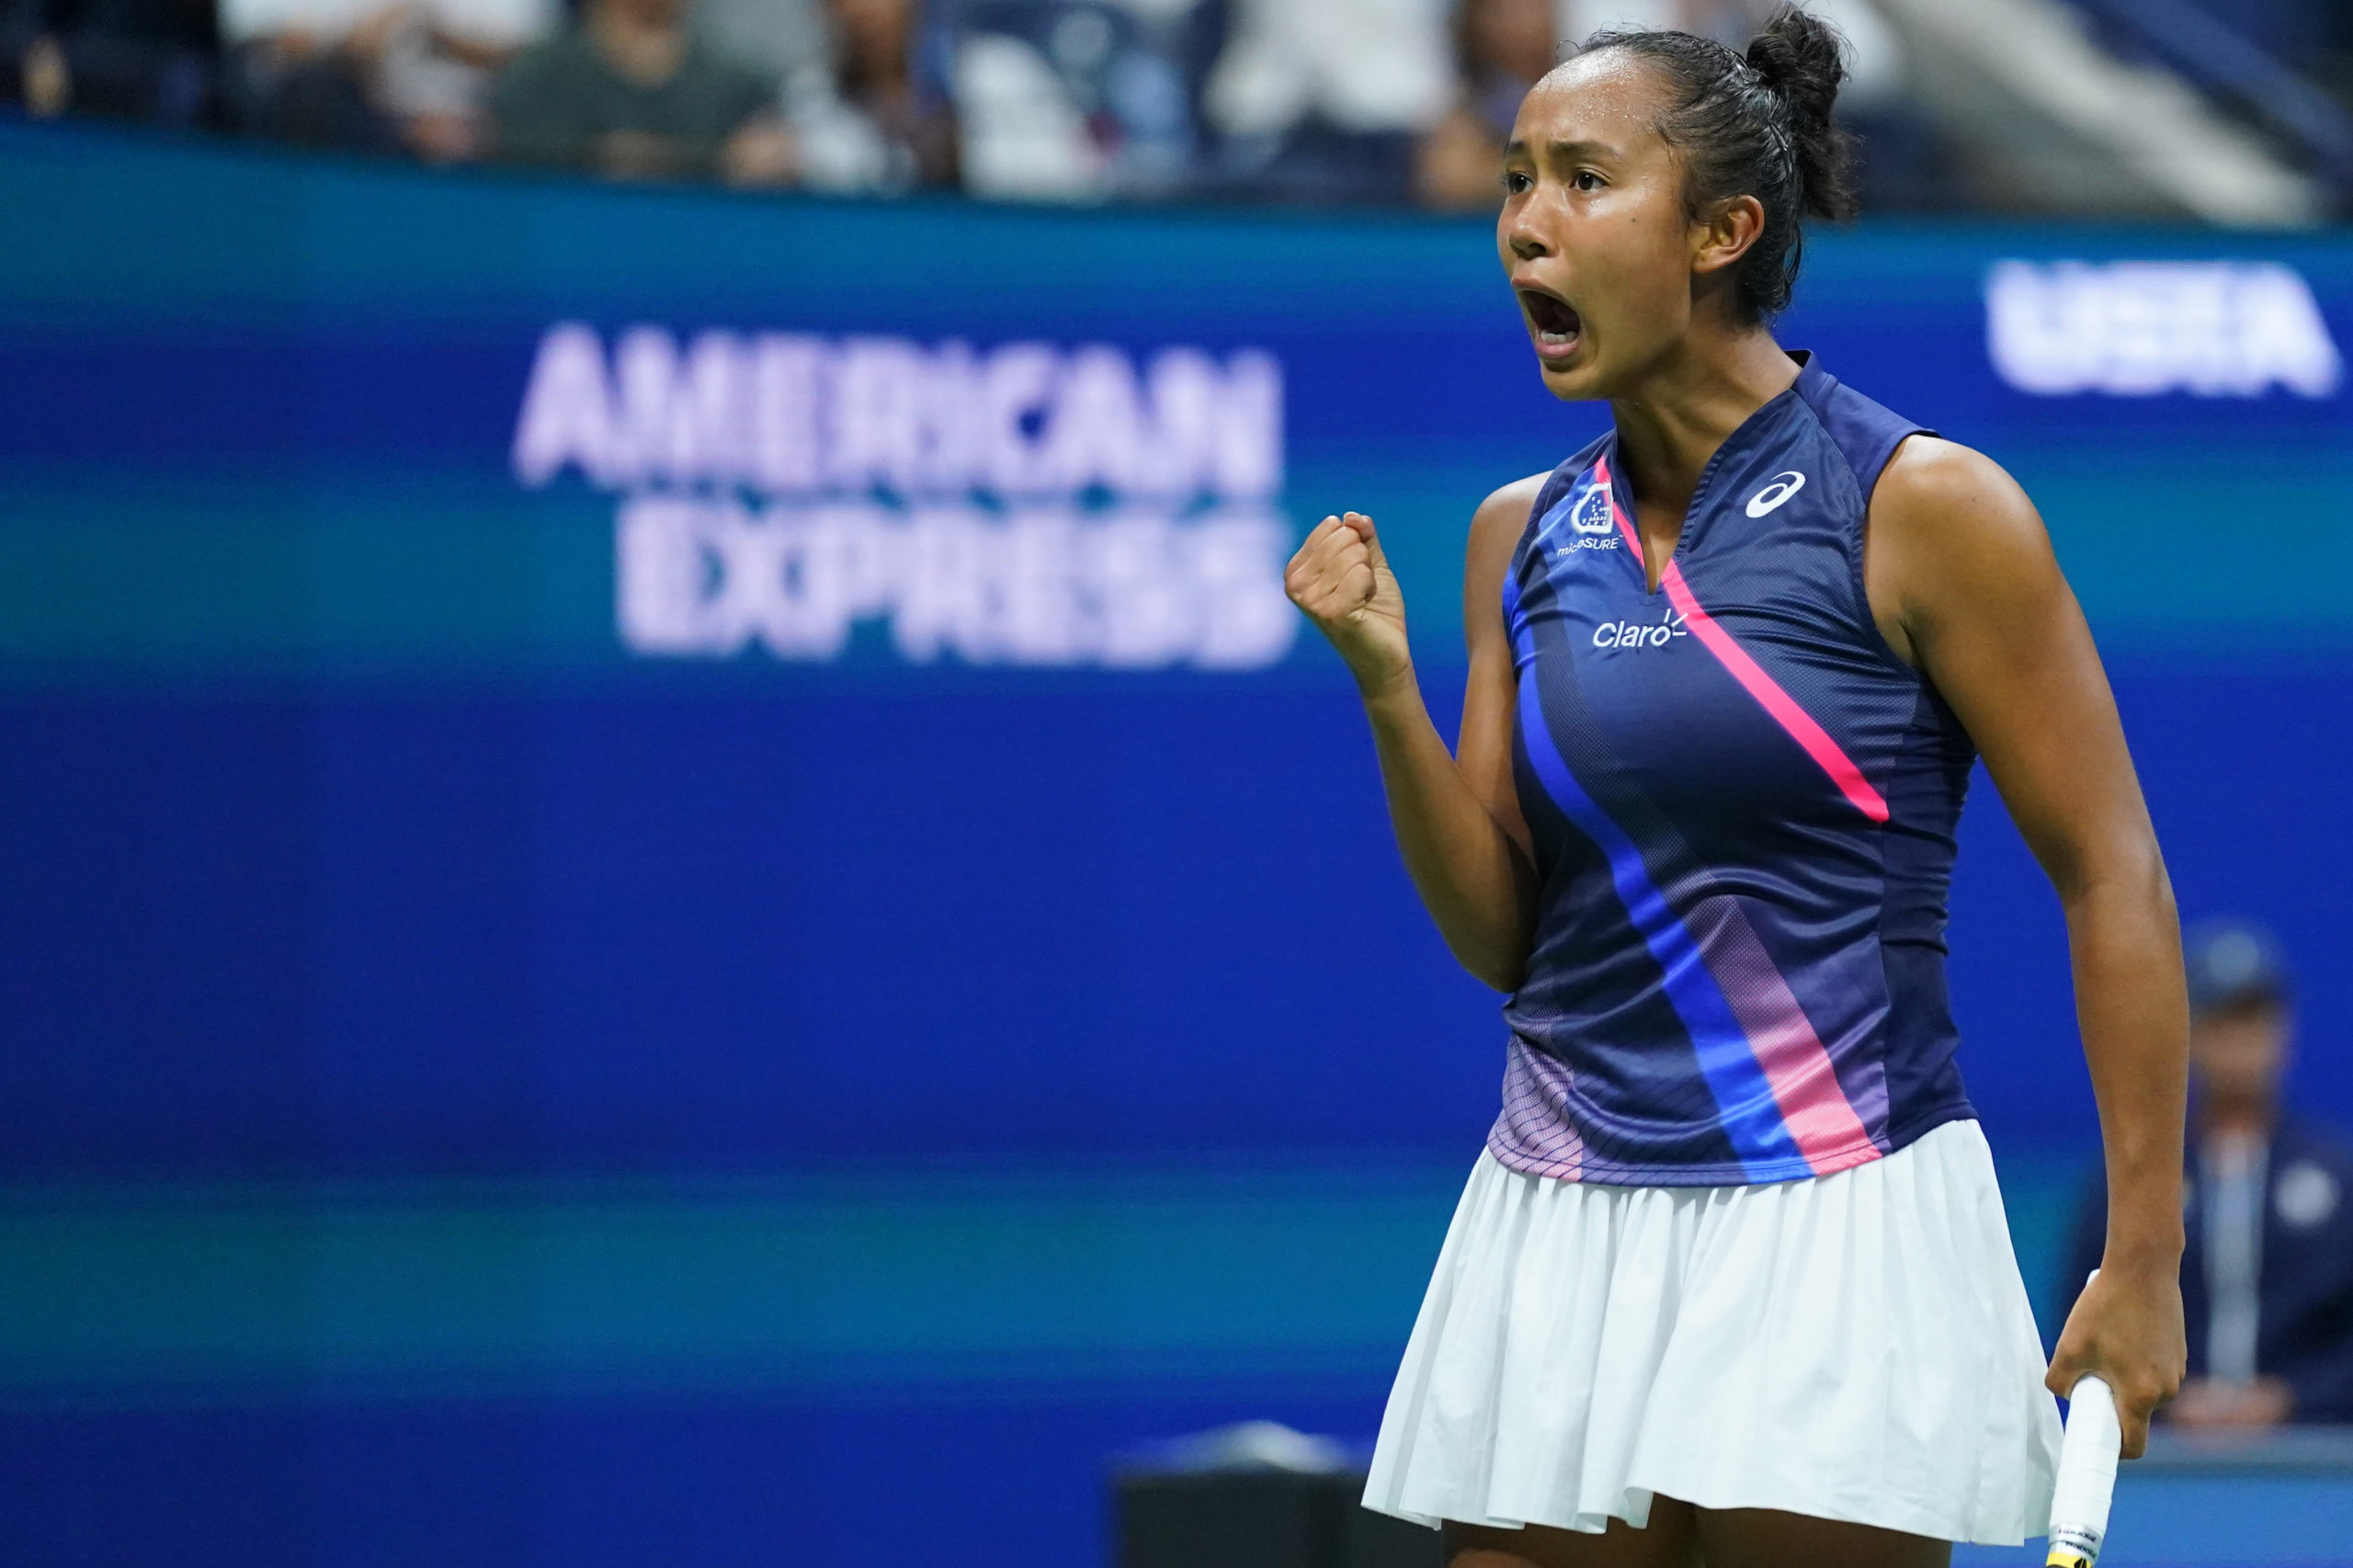 Leylah Fernandez of Canada reacts after winning a point against Aryna Sabalenka of Belarus (not pictured) on day eleven of the 2021 U.S. Open tennis tournament at USTA Billie Jean King National Tennis 